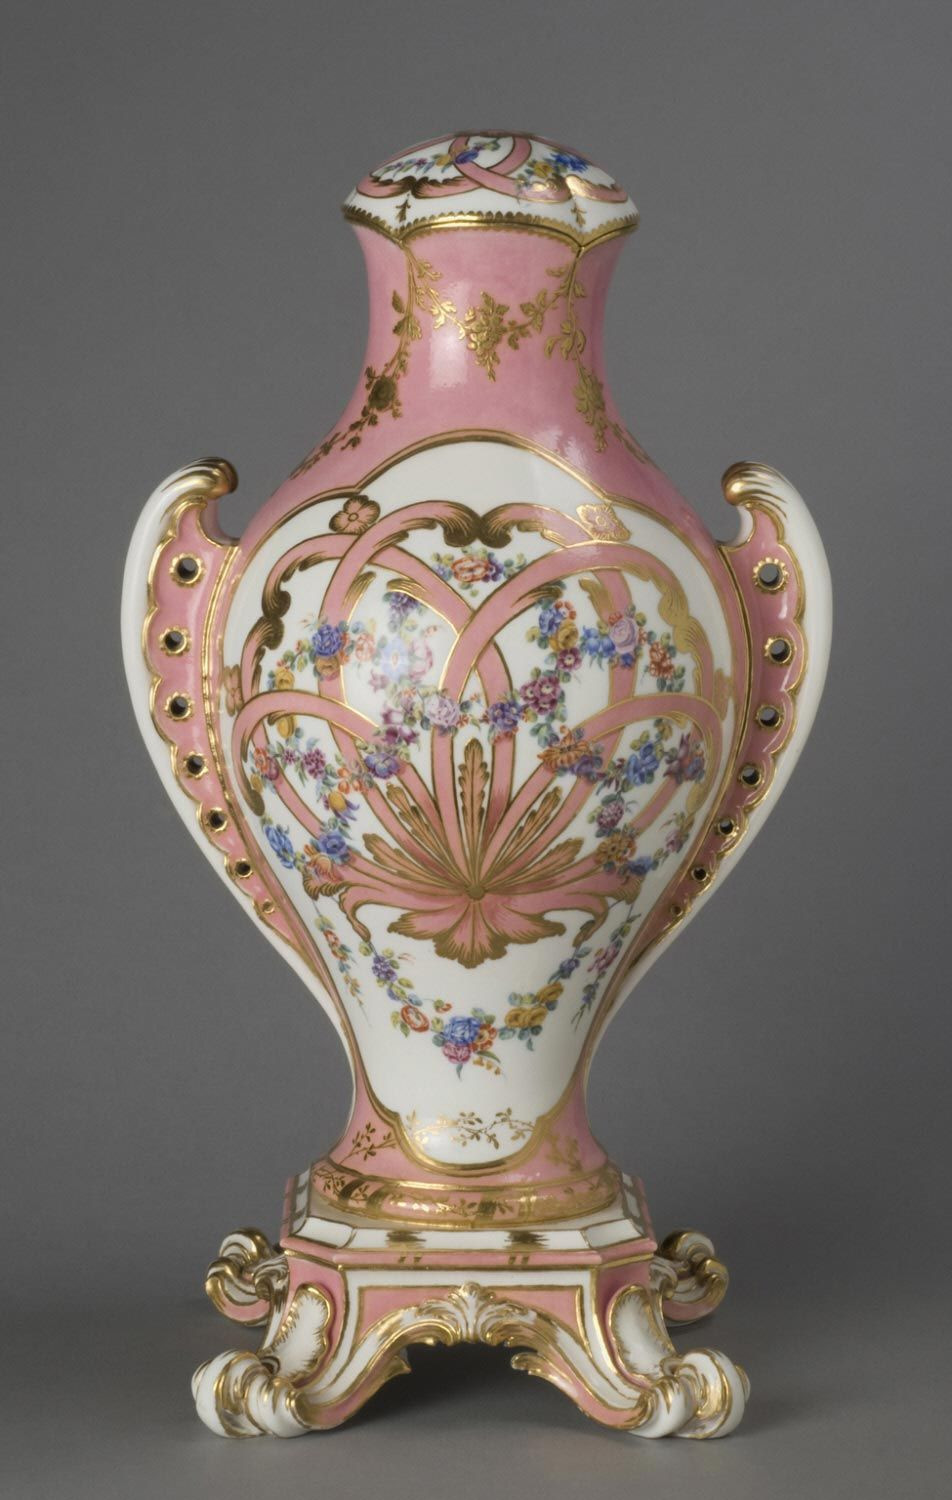 antique vases for sale of vase with lid made by the sa¨vres porcelain factory 1757 i have not throughout vase with lid made by the sa¨vres porcelain factory 1757 i have not seen to many pieces that incorporated pink so strongly but the makers of this piece did